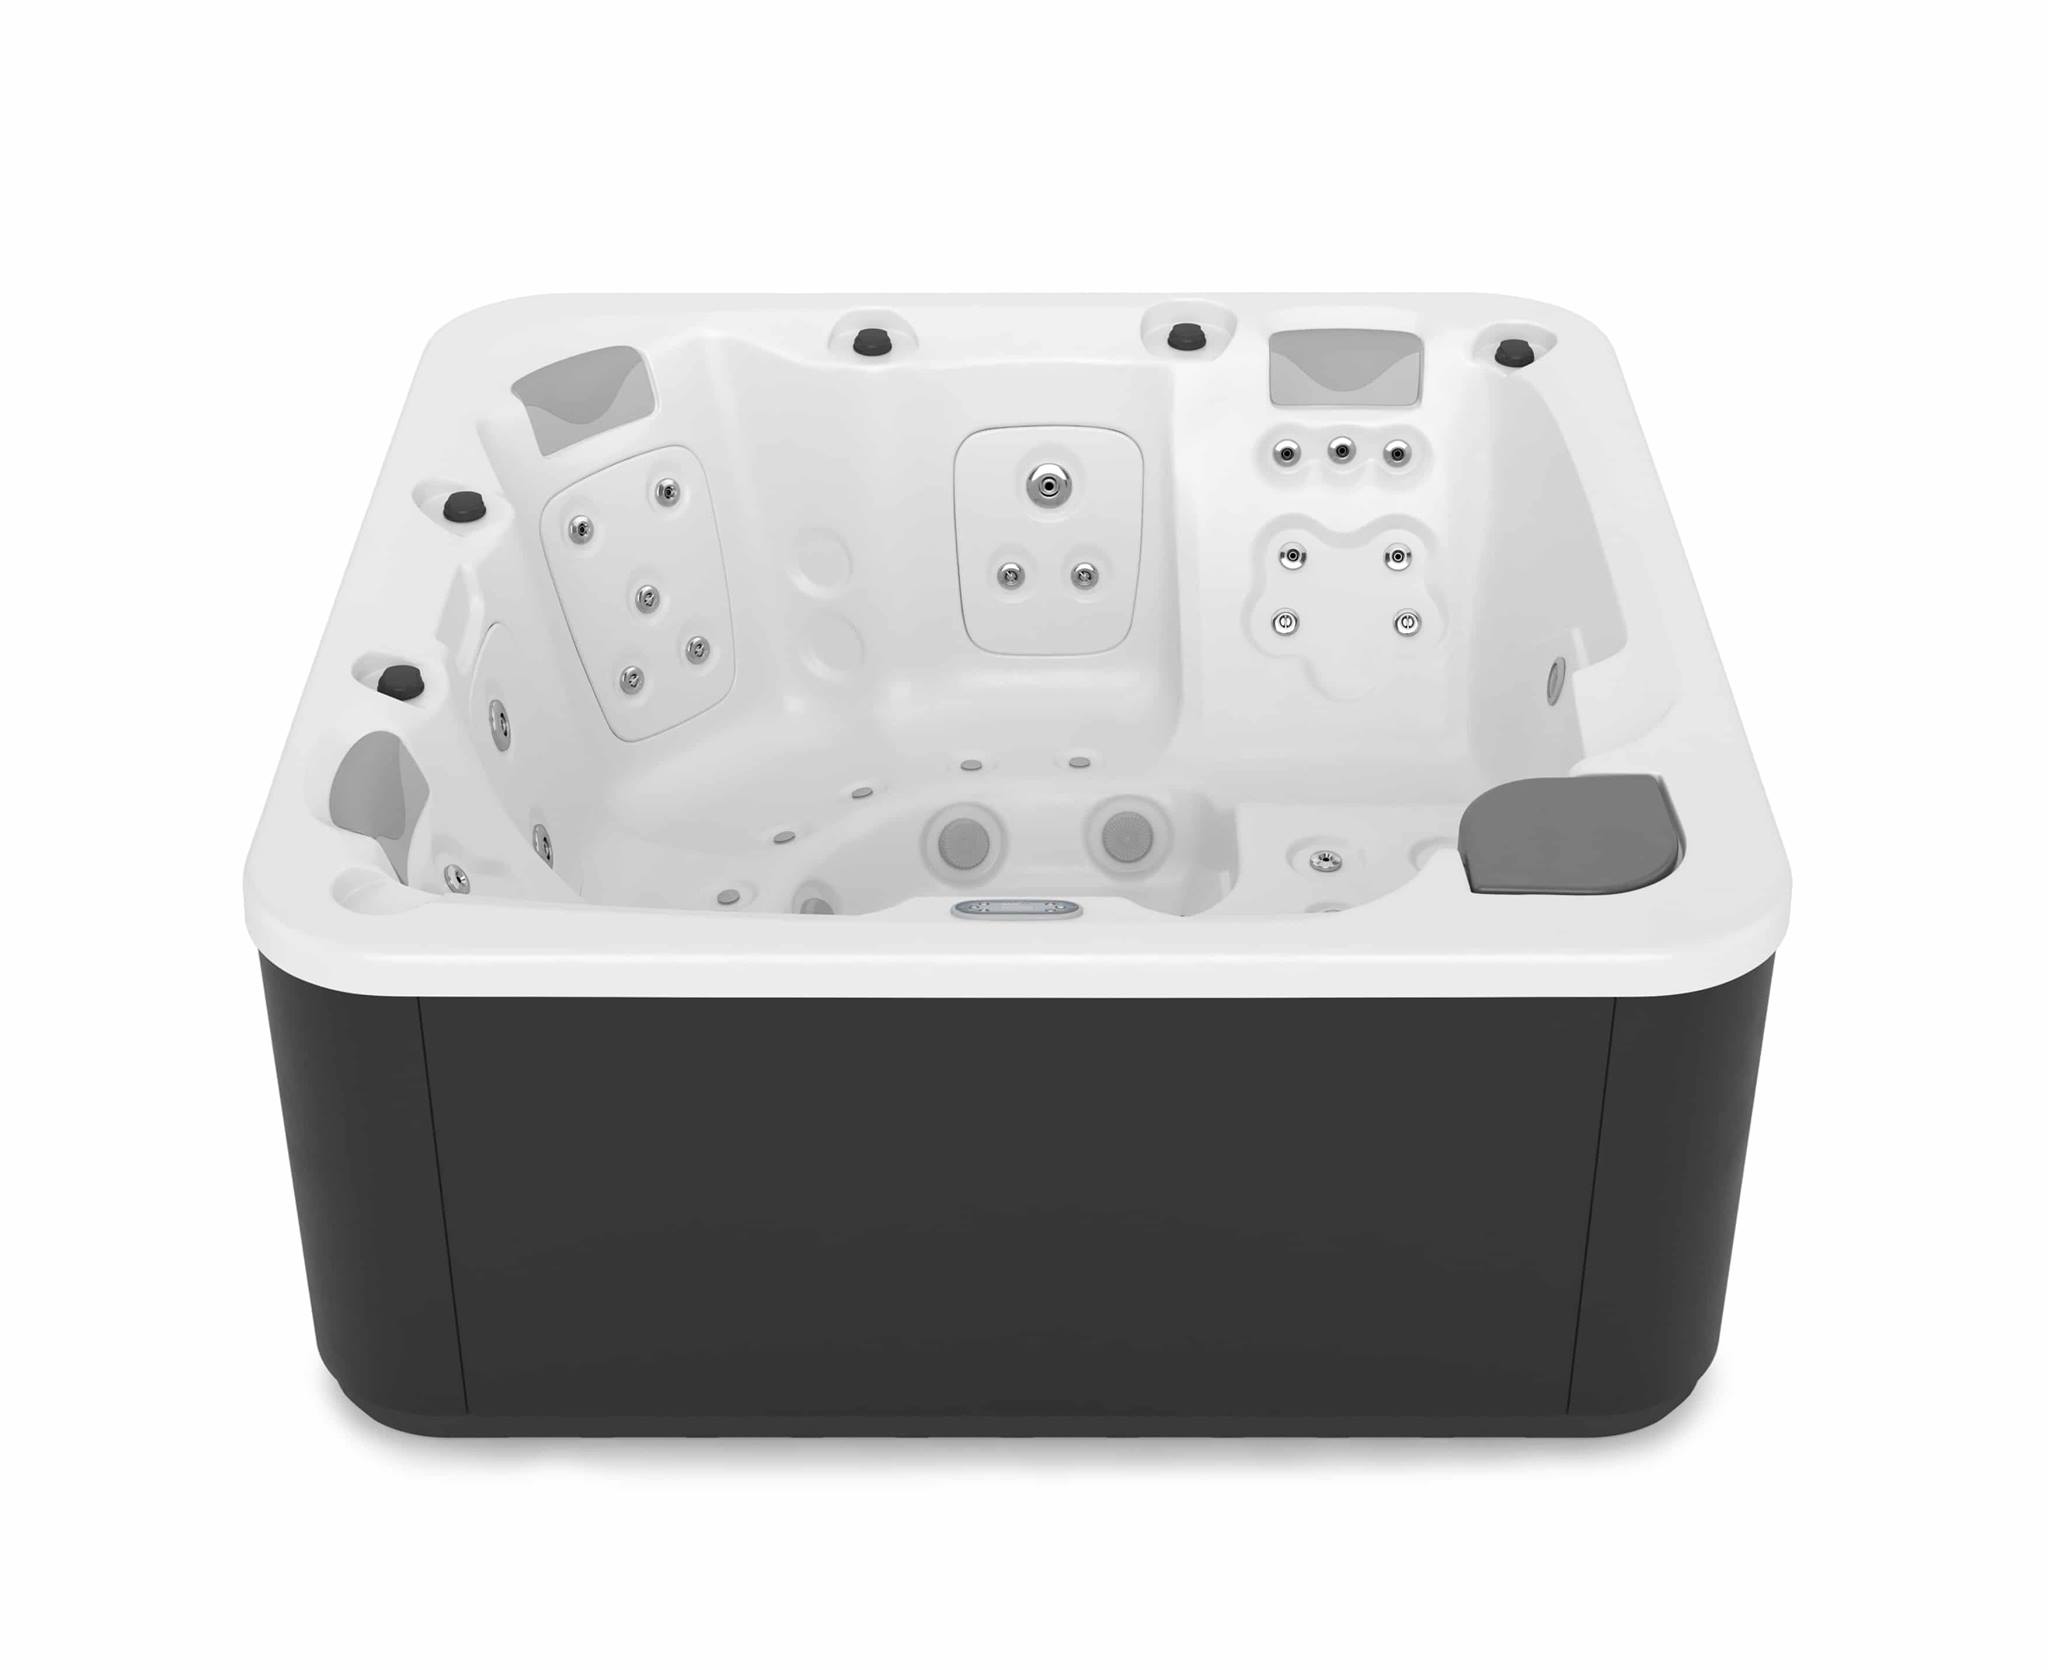 Aquavia´s Feel hot tub features 5 totally ergonomic and fully equipped positions, with two comfortable loungers and thre... » Outdoor Furniture Fuengirola, Costa Del Sol, Spain